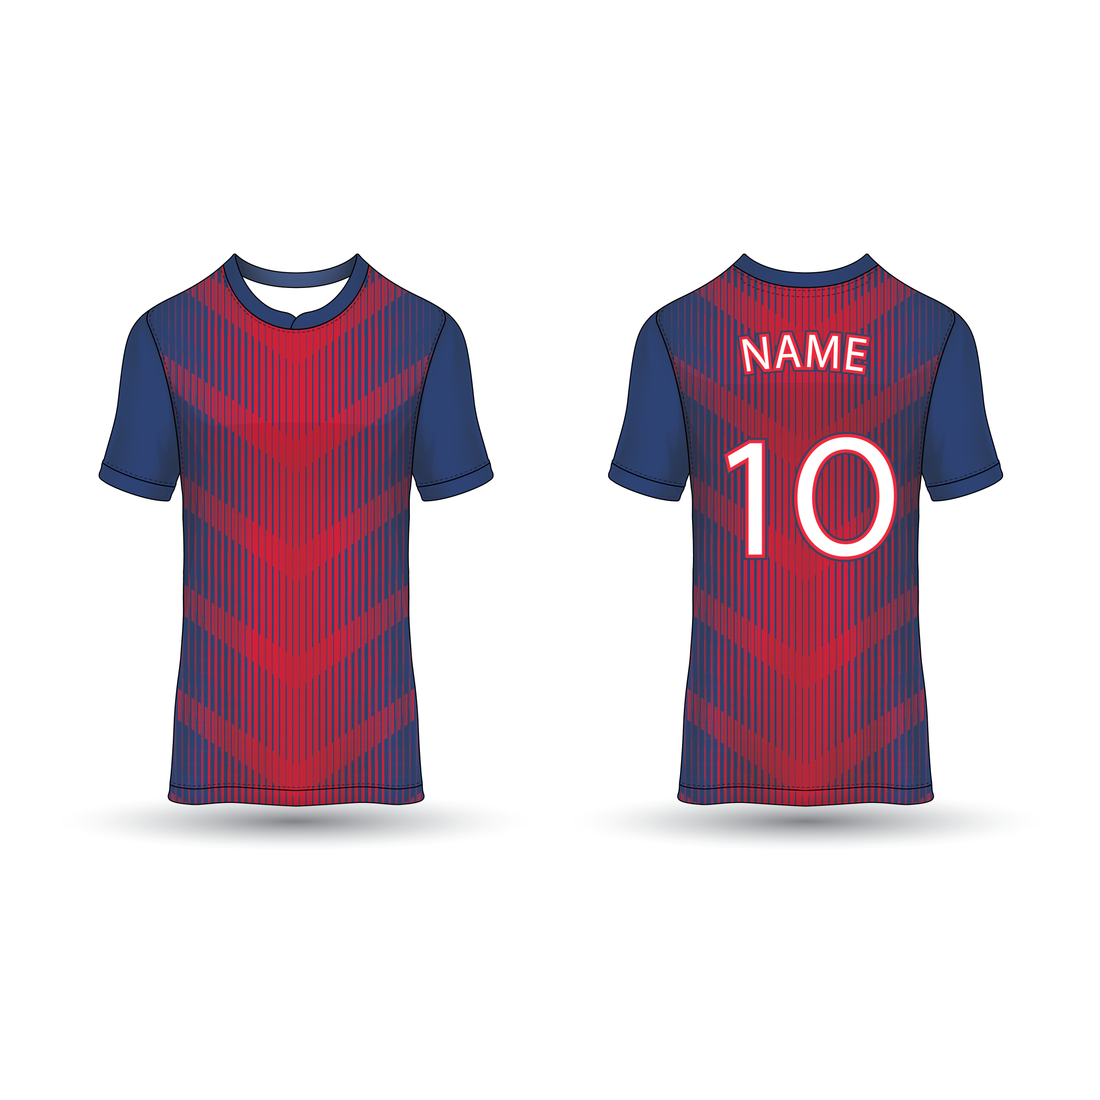 NEXT PRINT All Over Printed Customized Sublimation T-Shirt Unisex Sports Jersey Player Name & Number, Team Name NP50000225